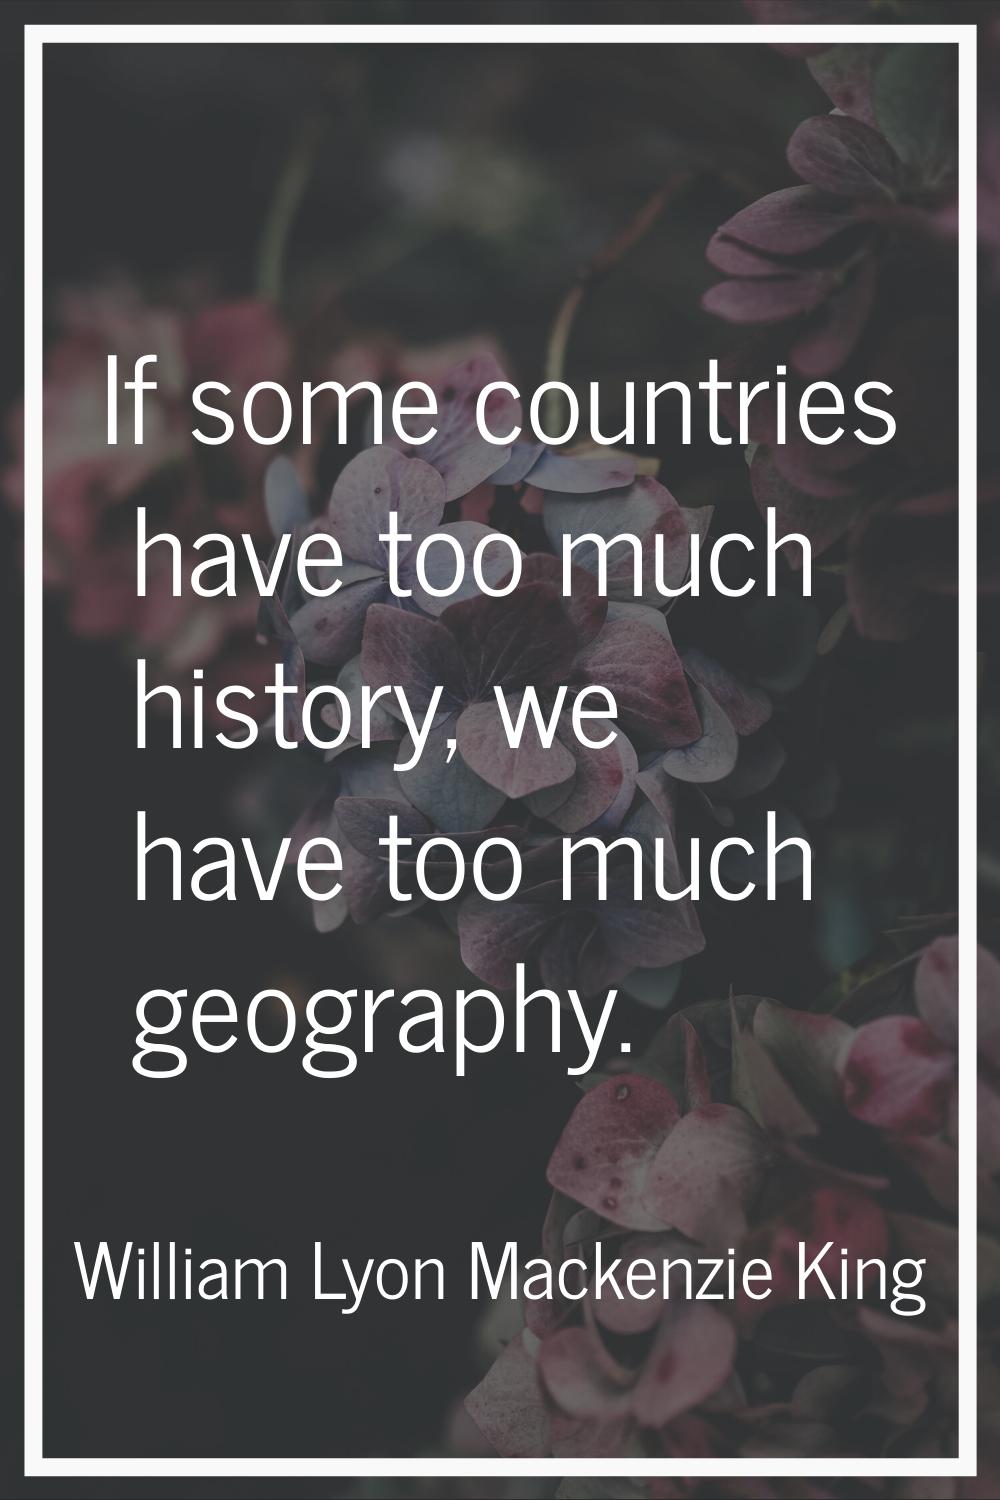 If some countries have too much history, we have too much geography.